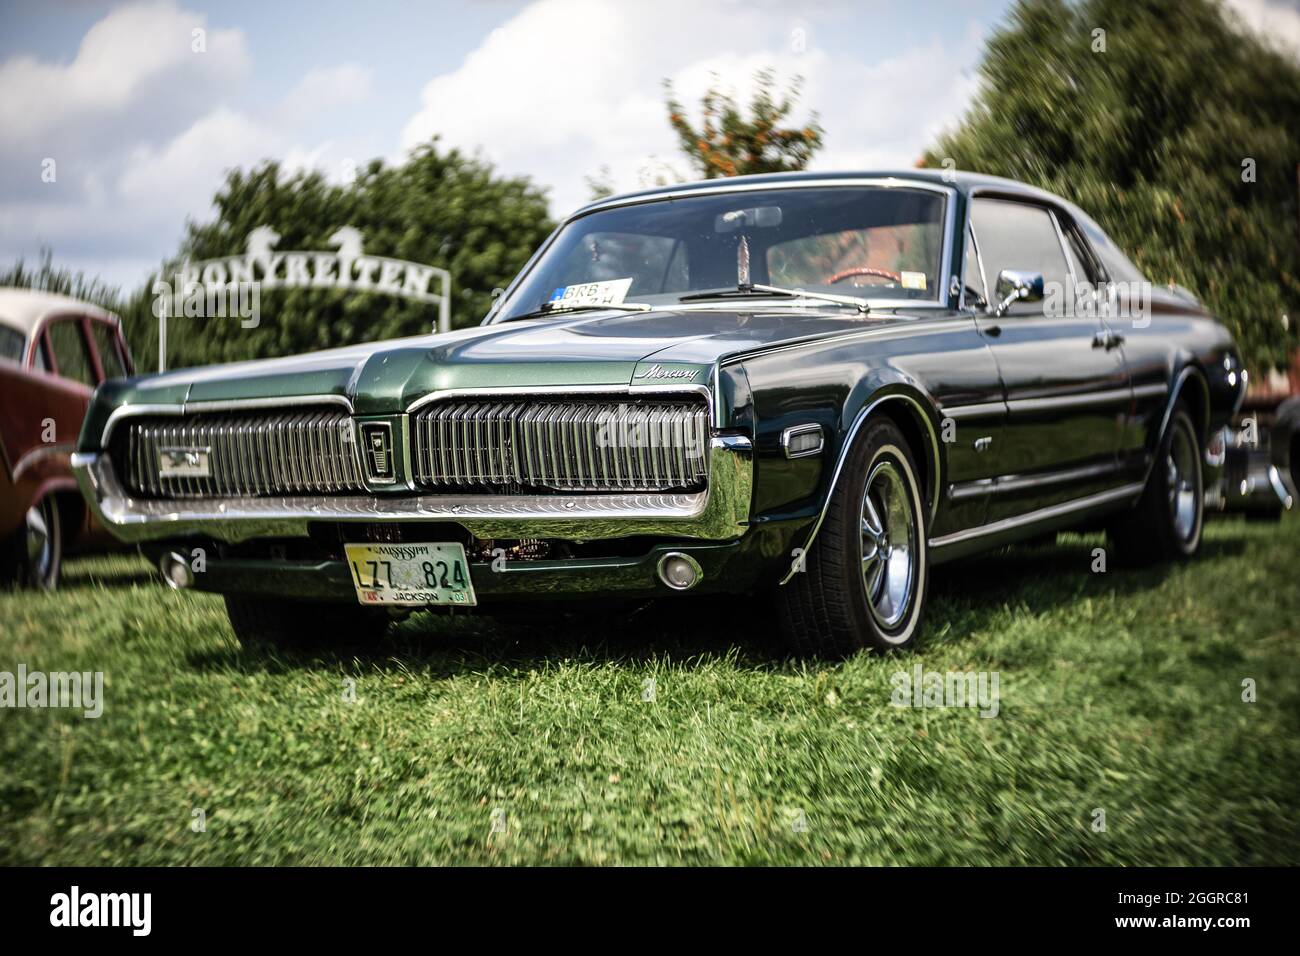 DIEDERSDORF, GERMANY - AUGUST 21, 2021: The pony car Mercury Cougar GT, 1967. Focus on center. Swirly bokeh. The exhibition of 'US Car Classics'. Stock Photo